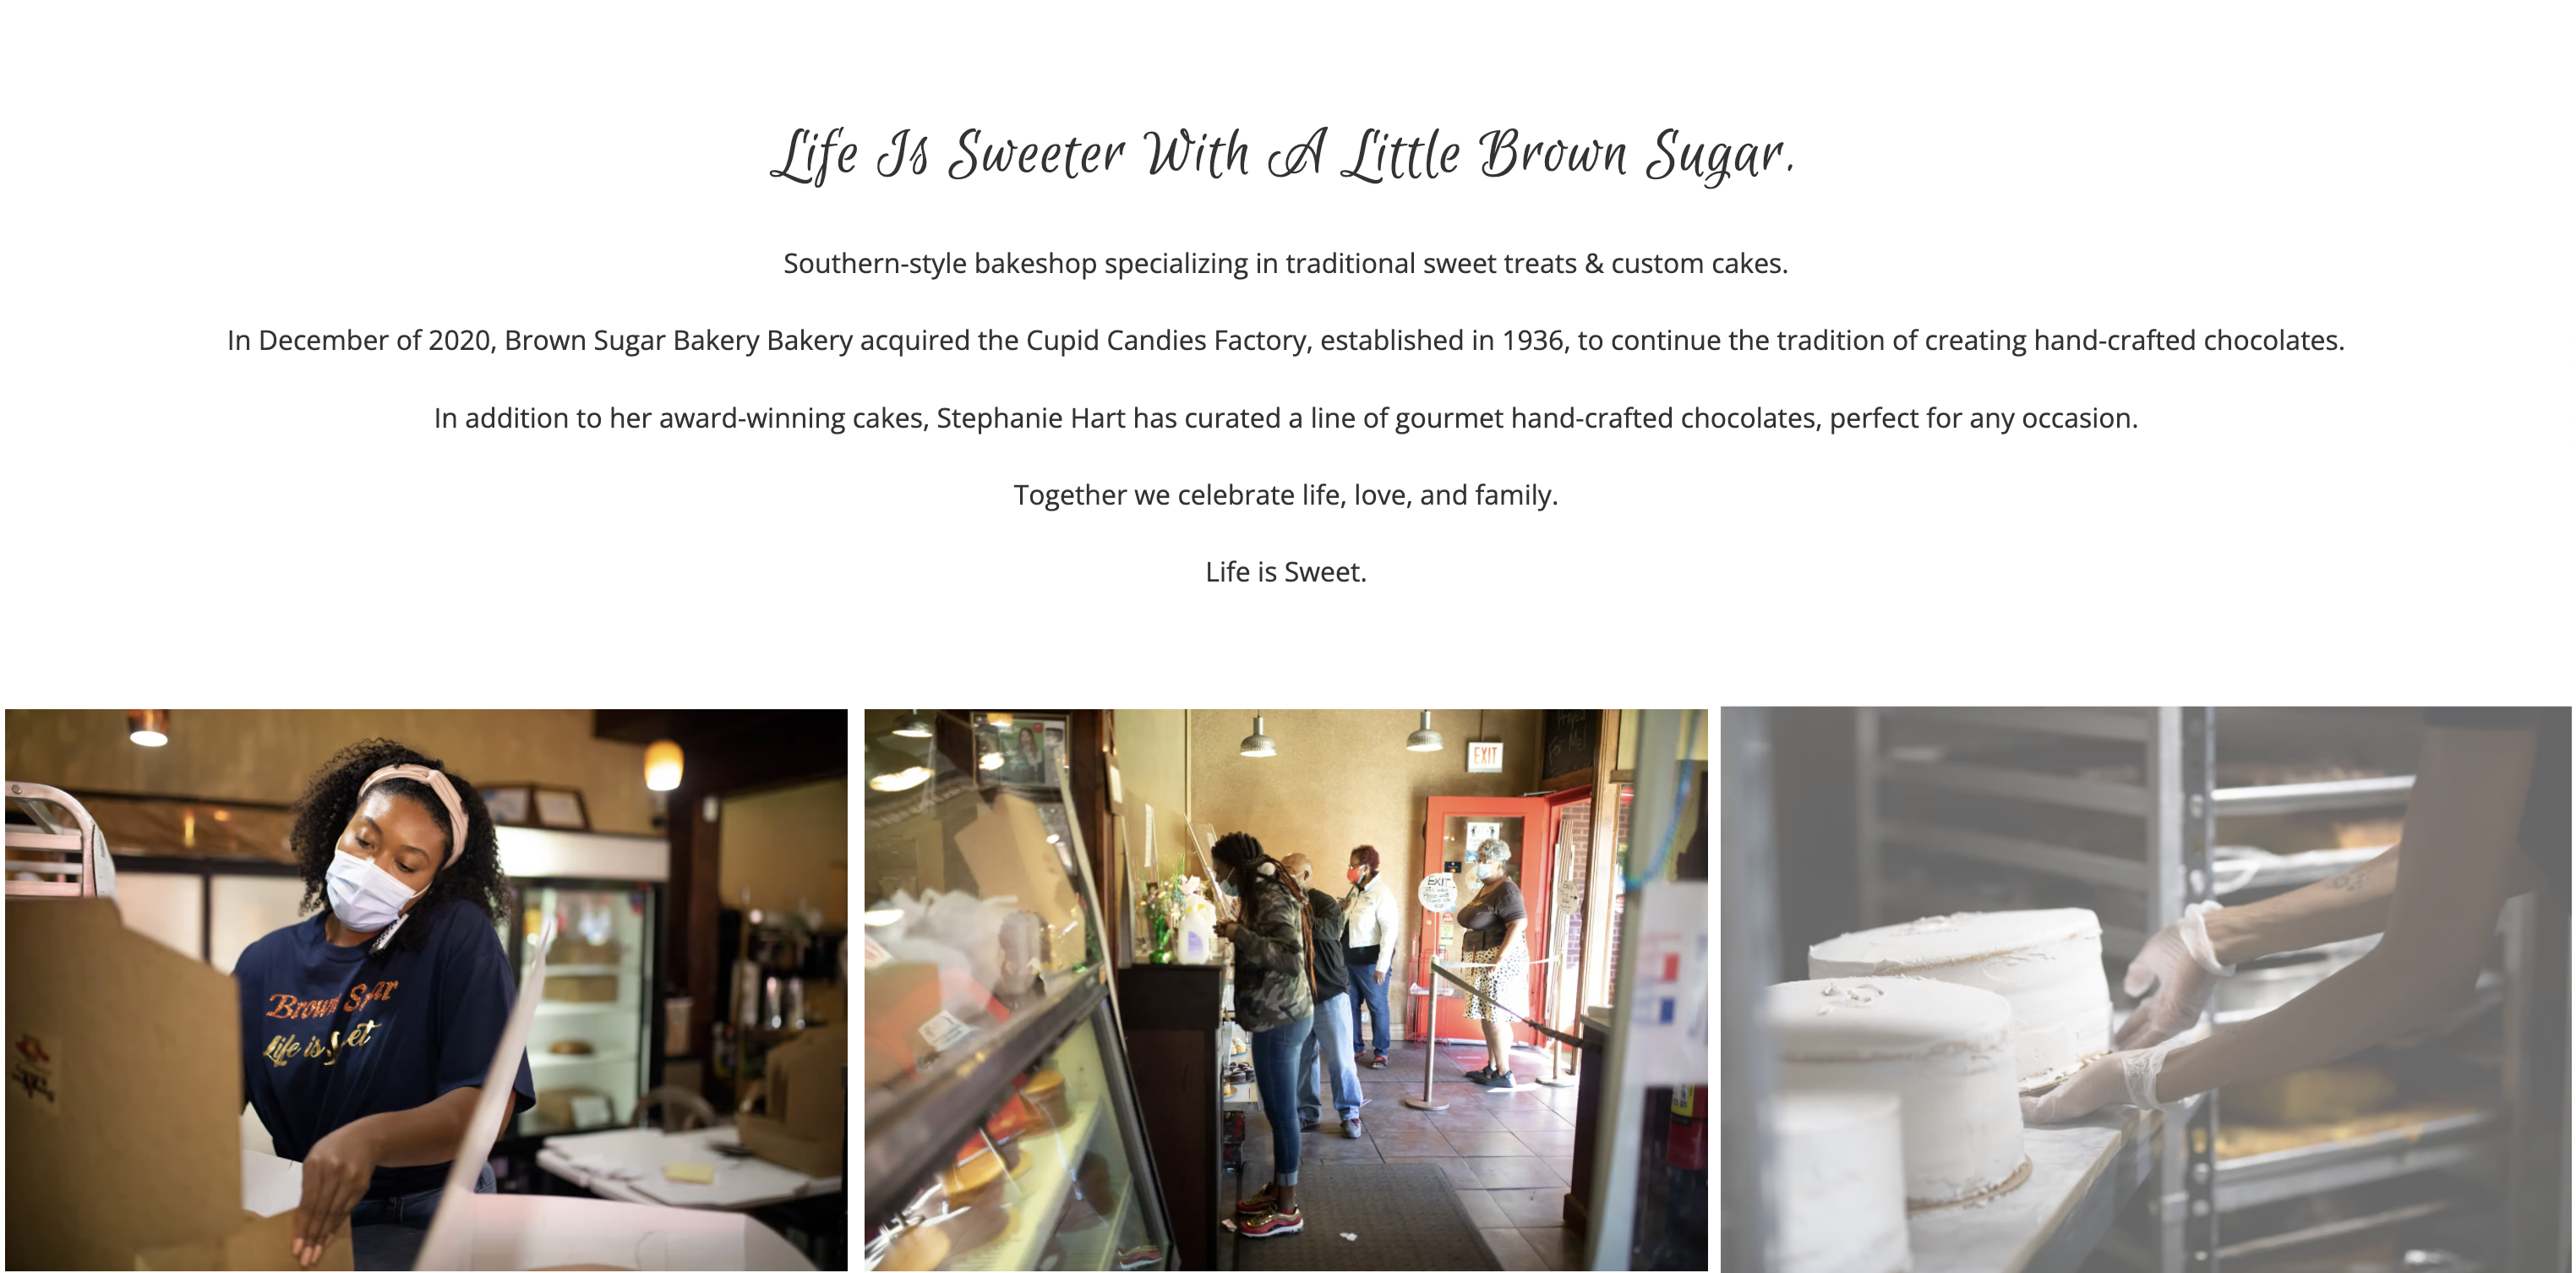 Brown Sugar Bakery's About Page